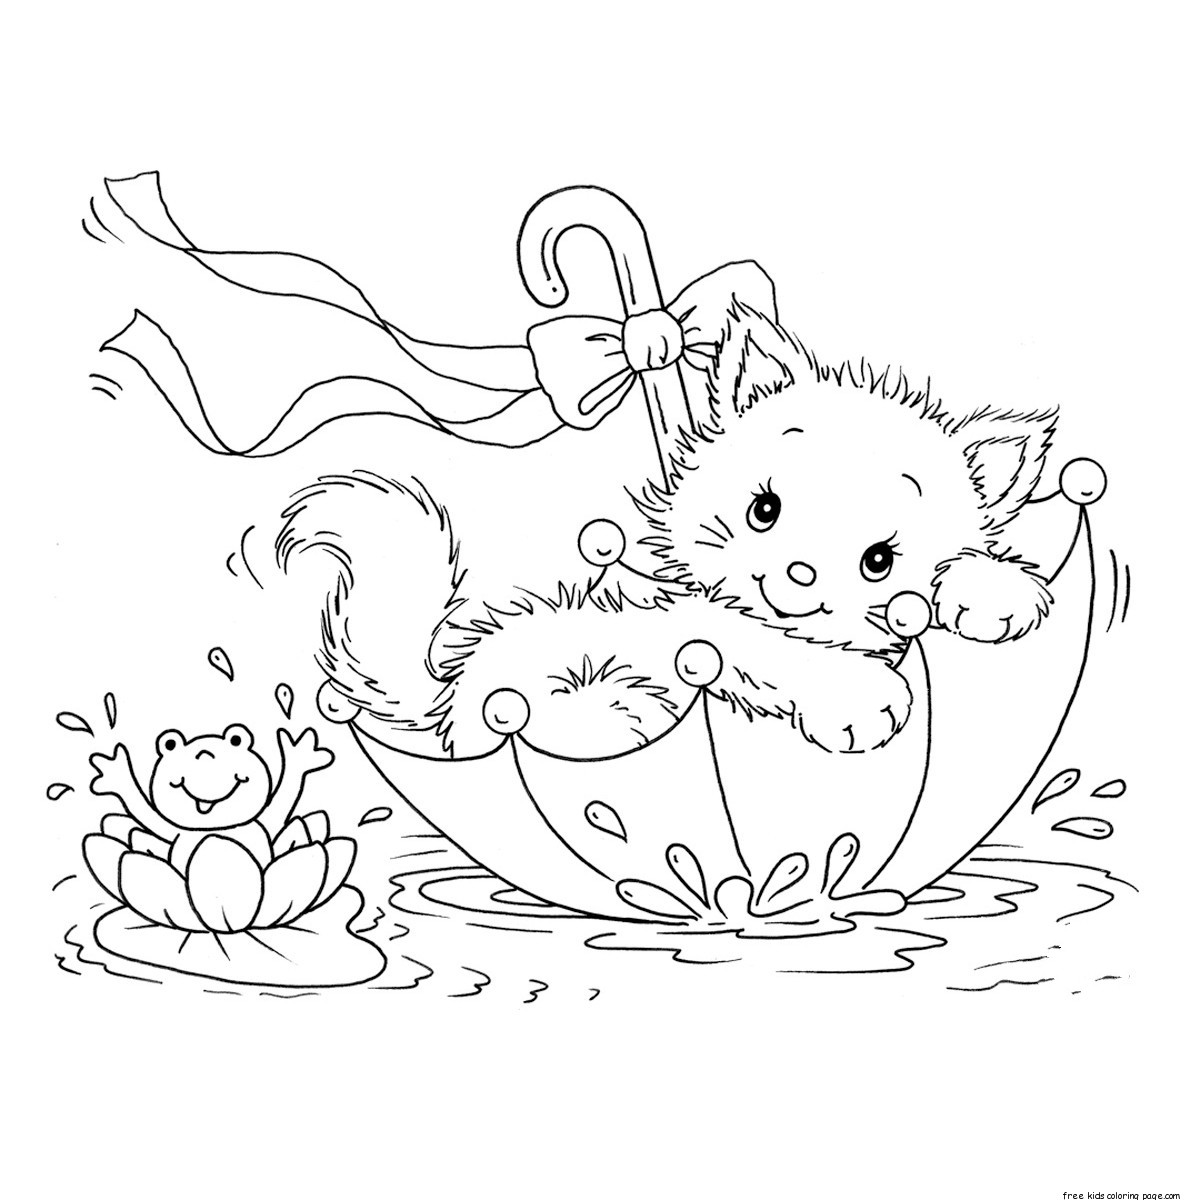 Printable coloring pages kitty cat and frog in umbrella